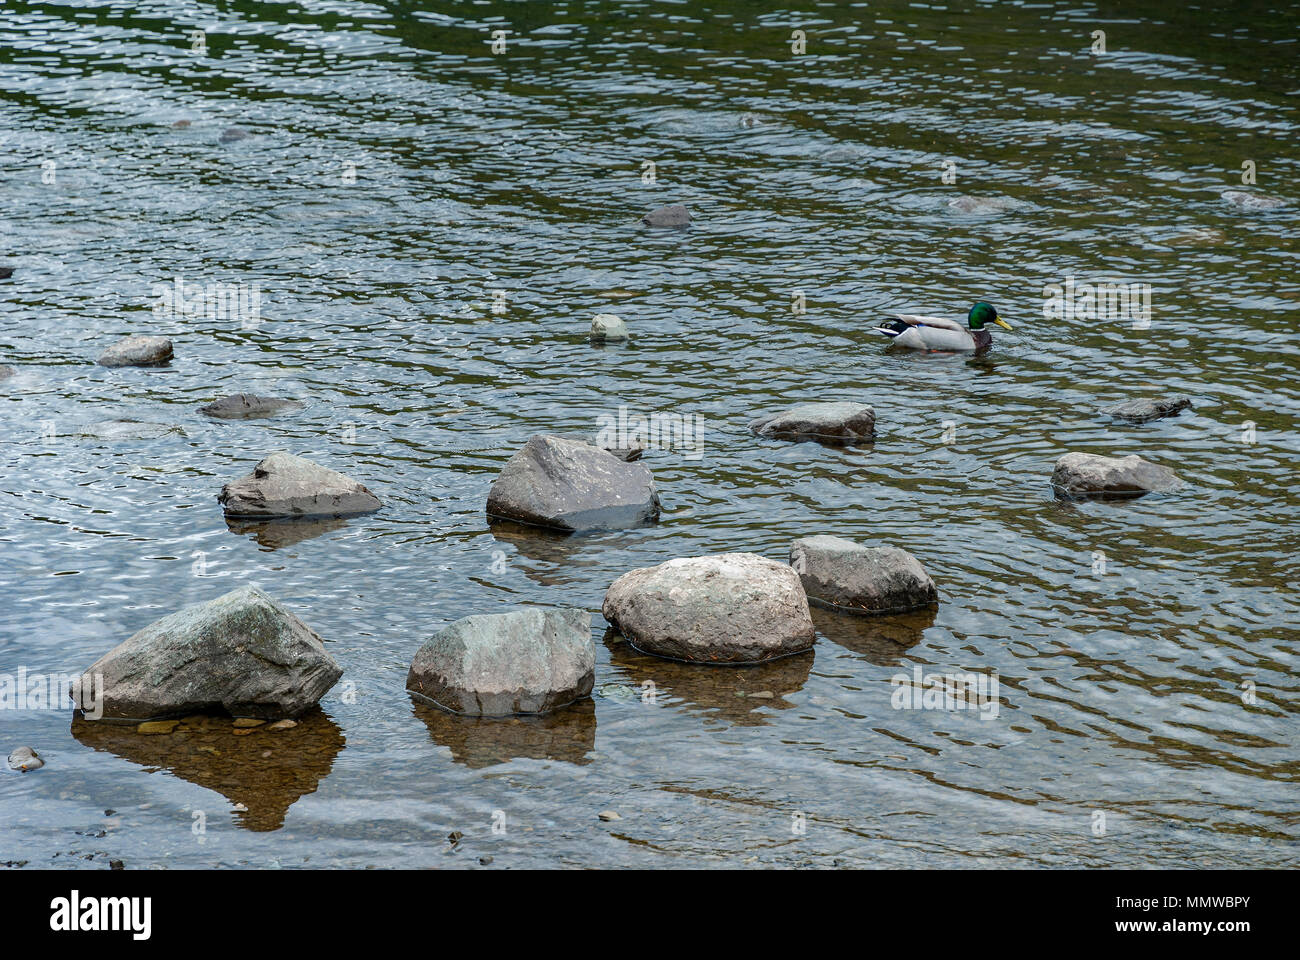 Mallard duck swimming by some rocks in the water. Stock Photo